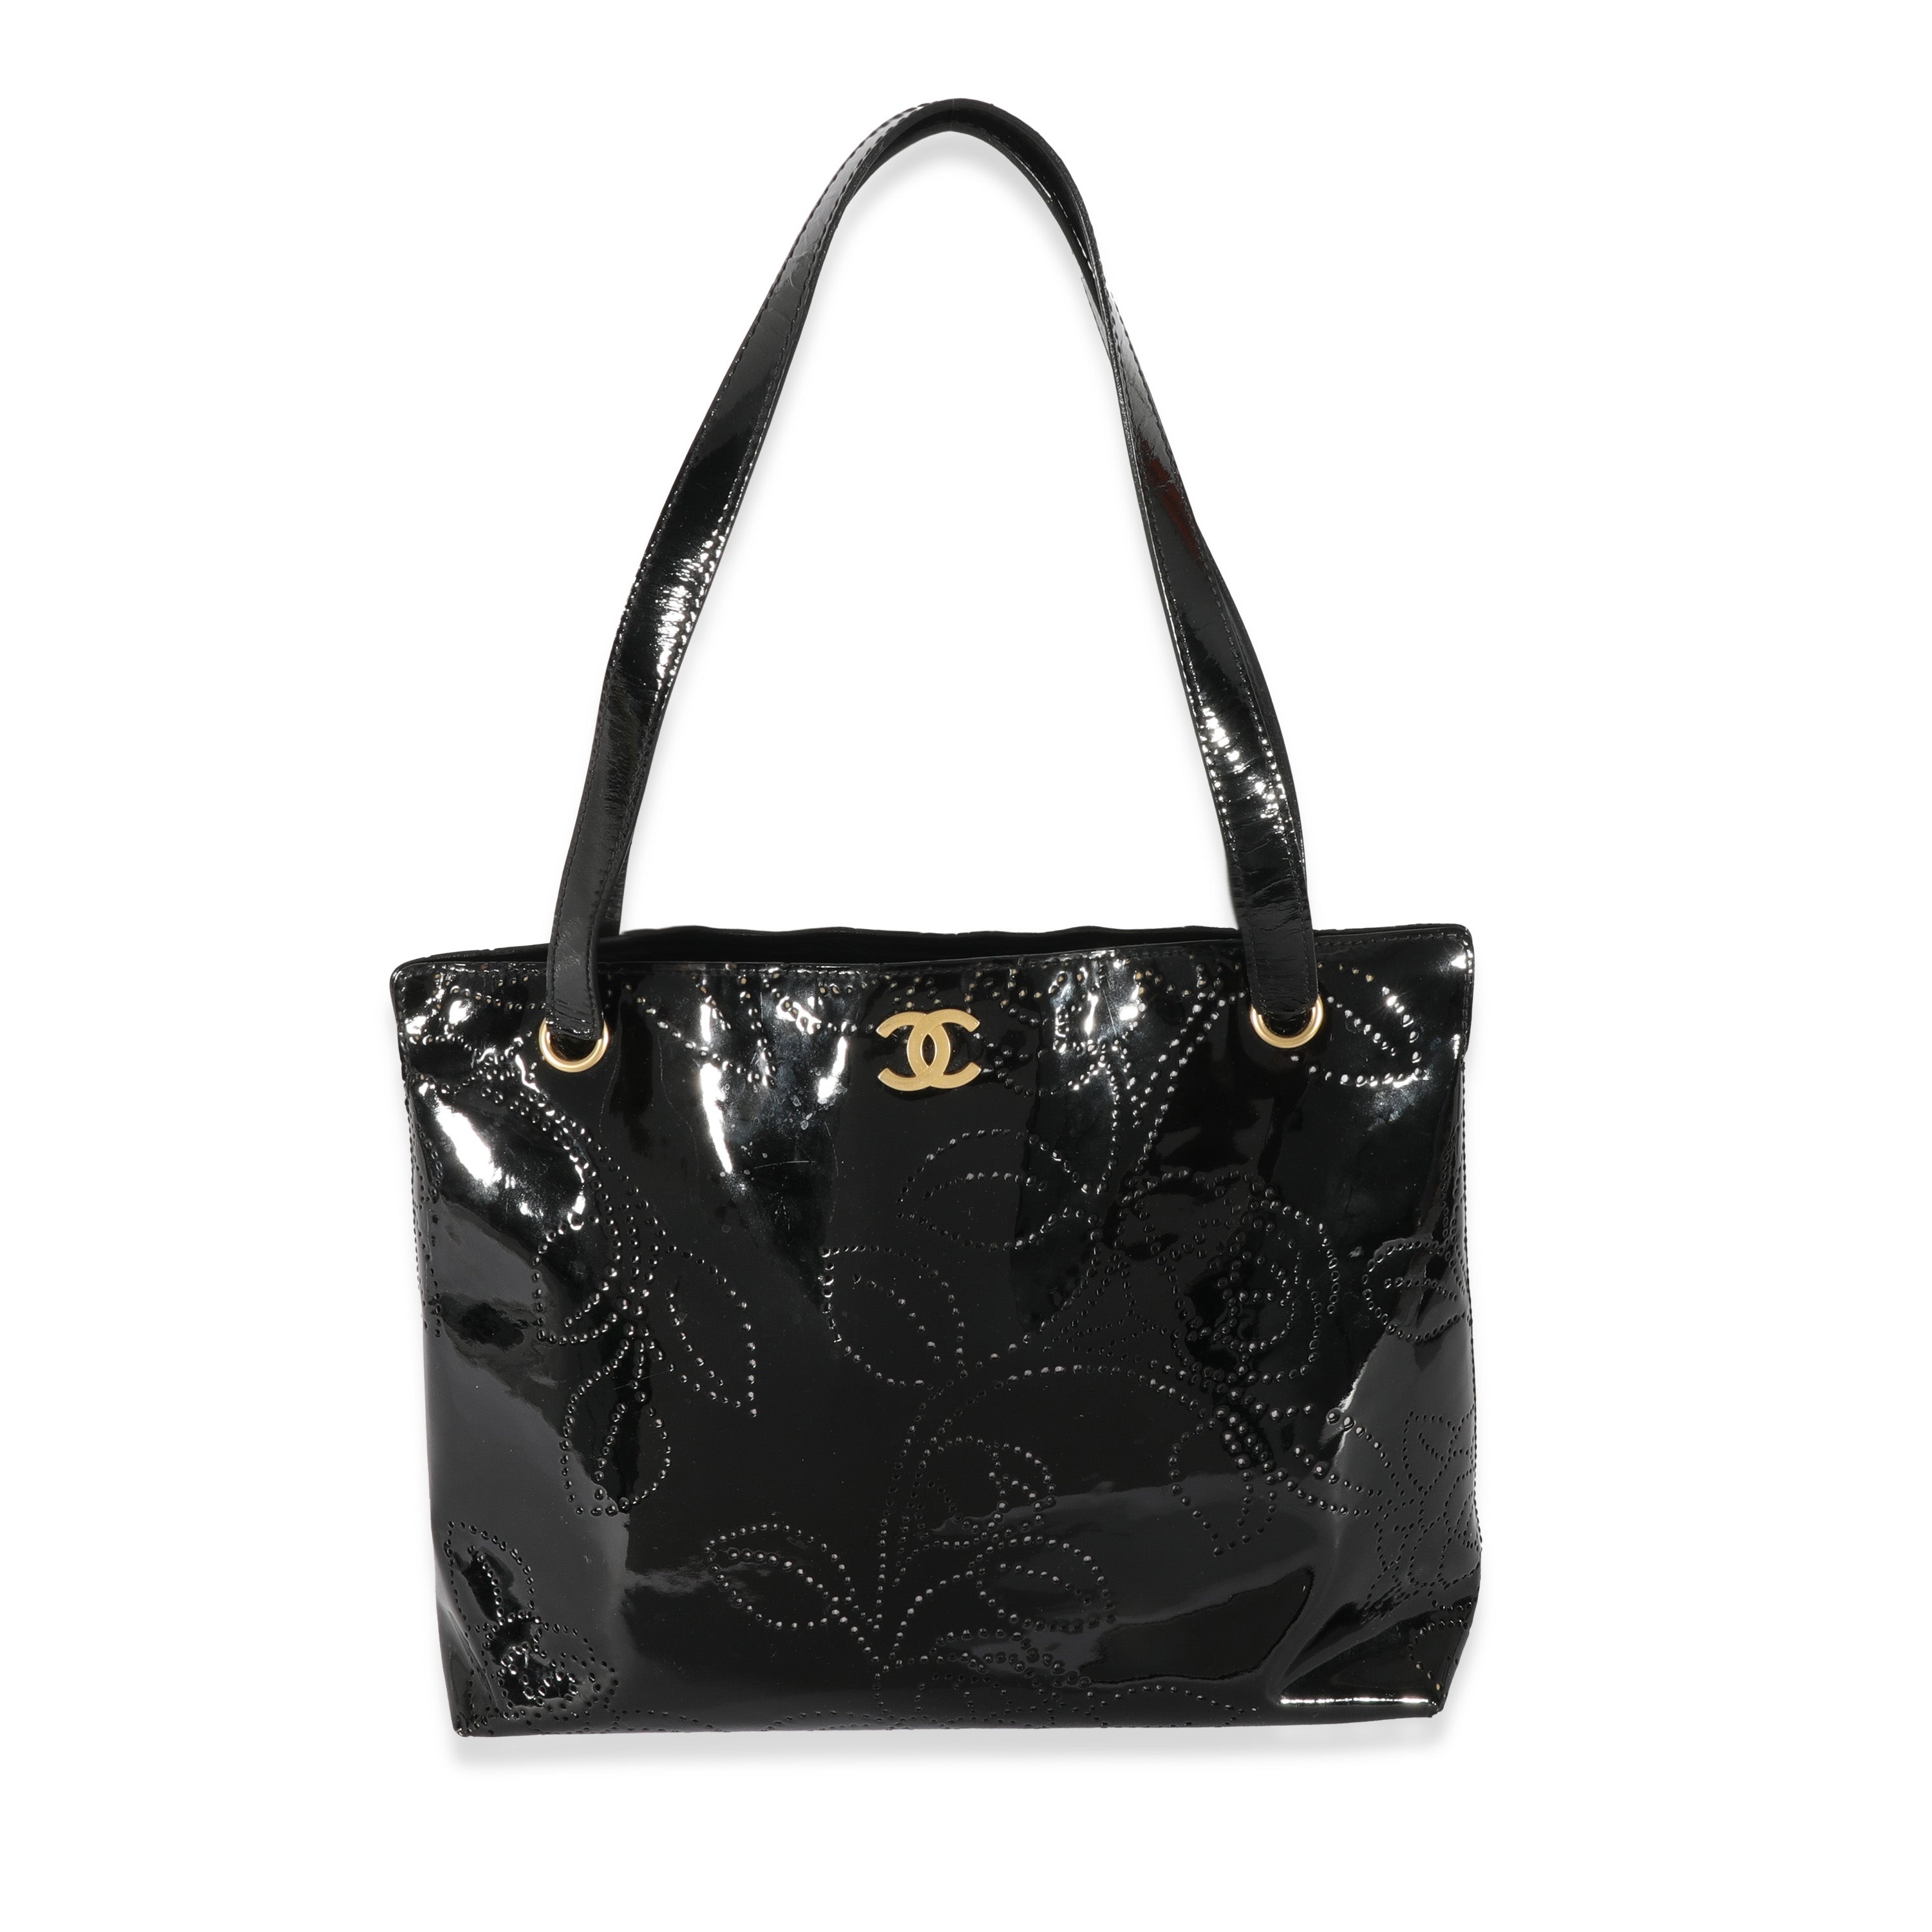 Chanel Black Patent Perforated Camellia Tote